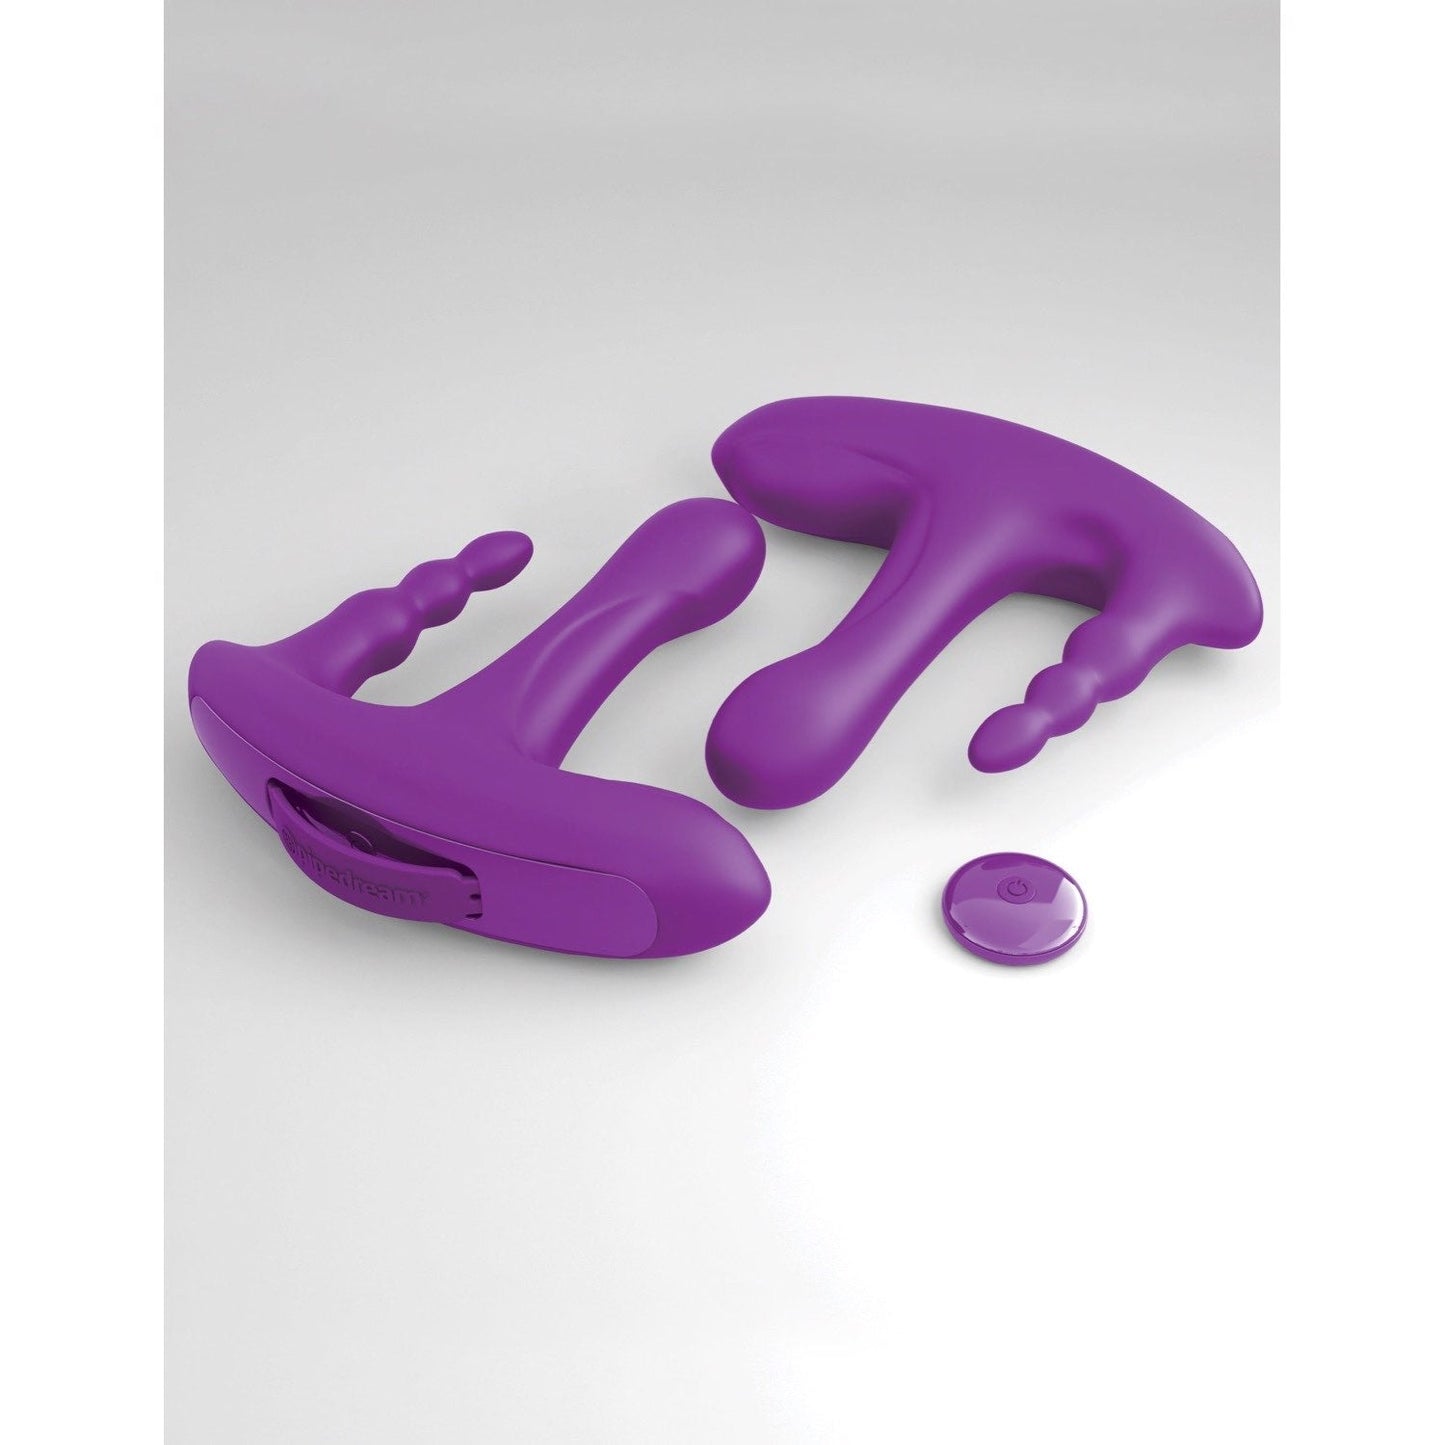 Rock N Ride - Purple USB Rechargeable Stimulator with Wireless Remote